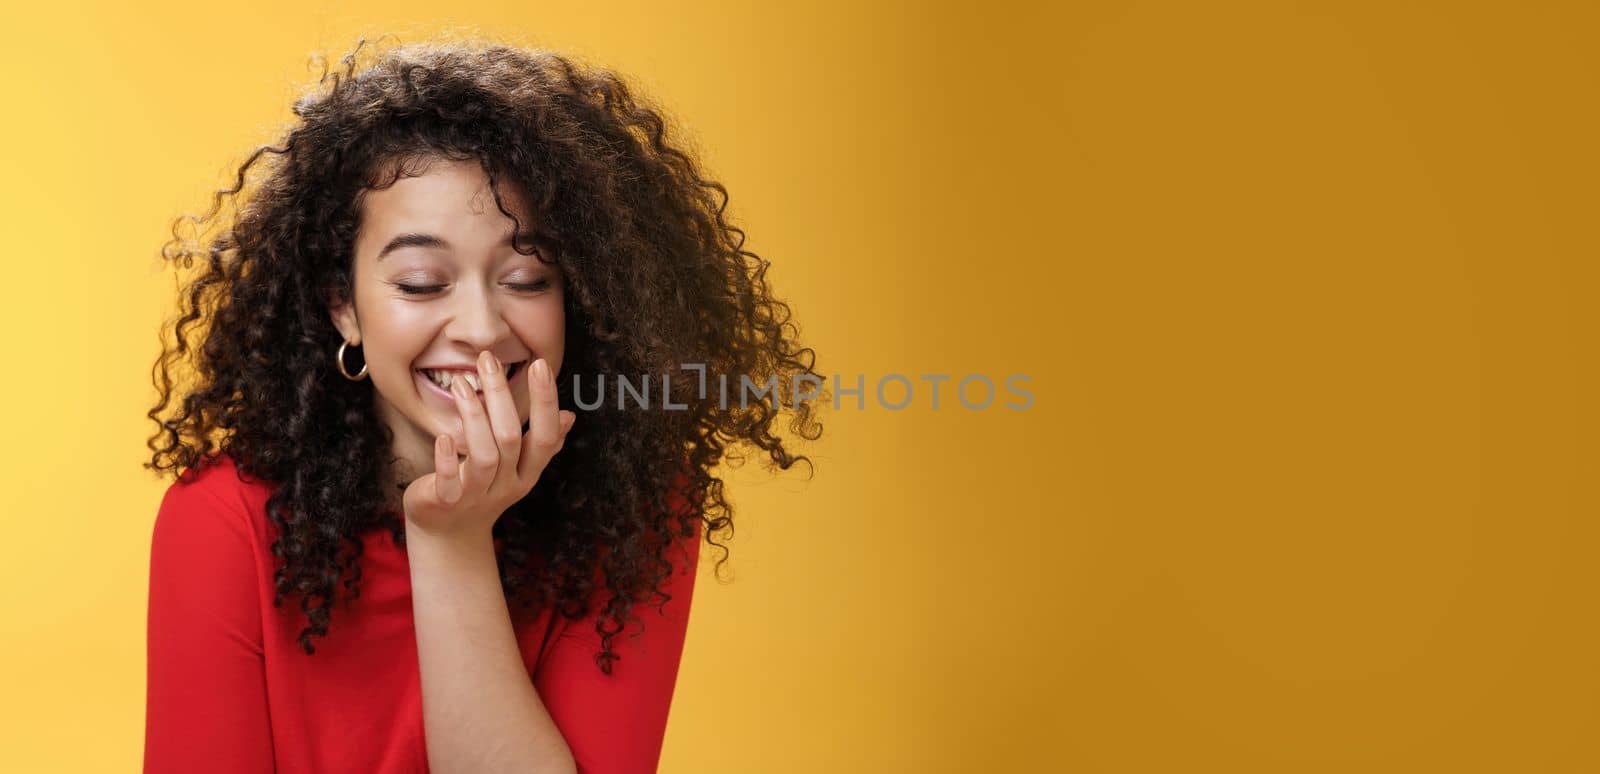 Girl laughing out loud cannot hold laugh as feeling amused hearing hilarious jokes covering mouth with palm as chuckling happily tilting forward with closed eyes, smiling over yellow wall. Emotions and body language concept